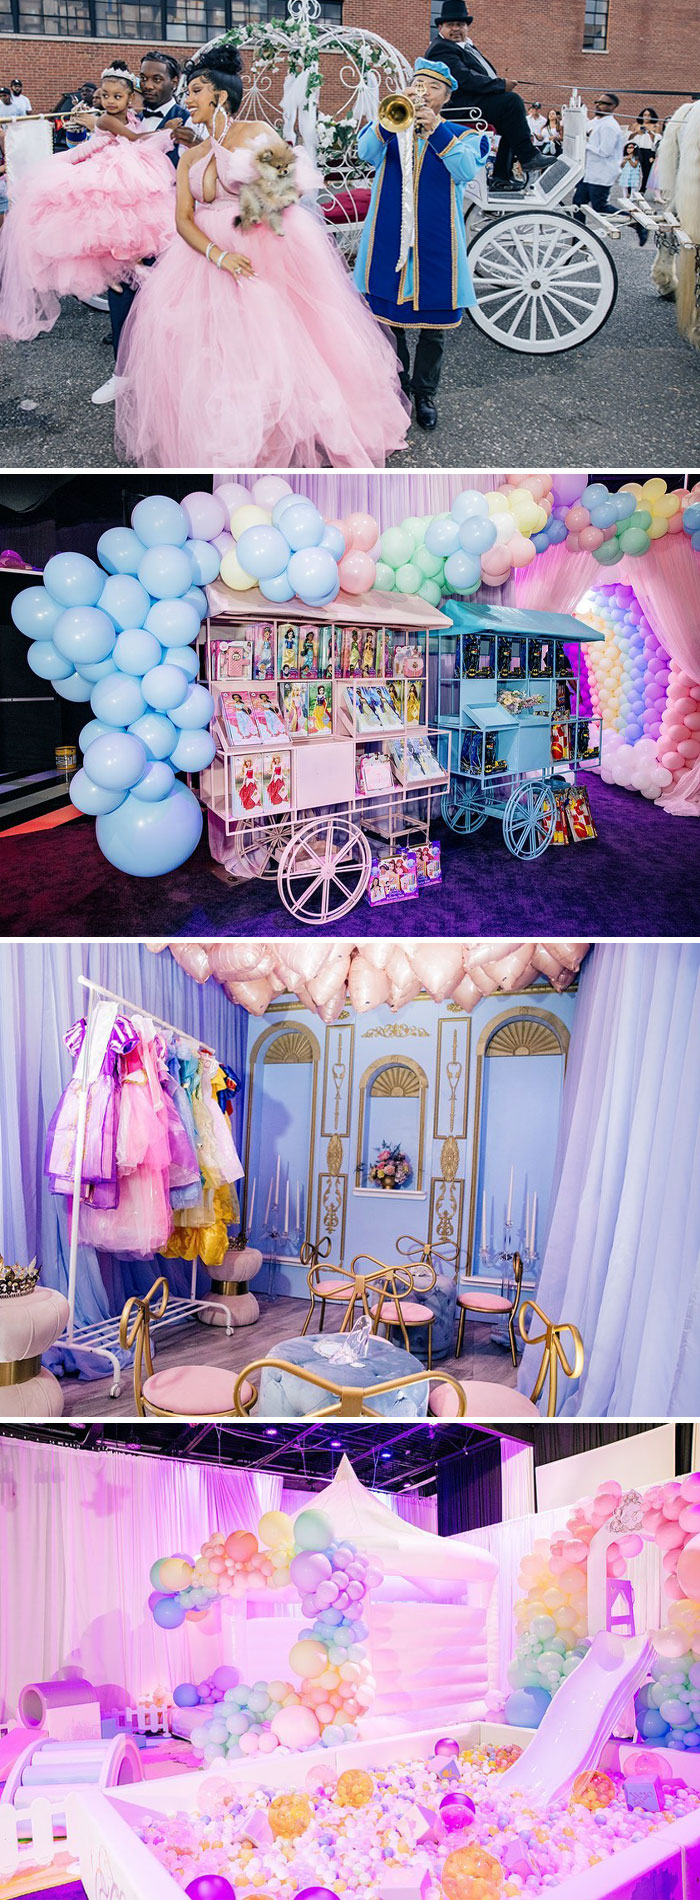 Cardi B Surprised Her Daughter With An Extravagant Birthday Party